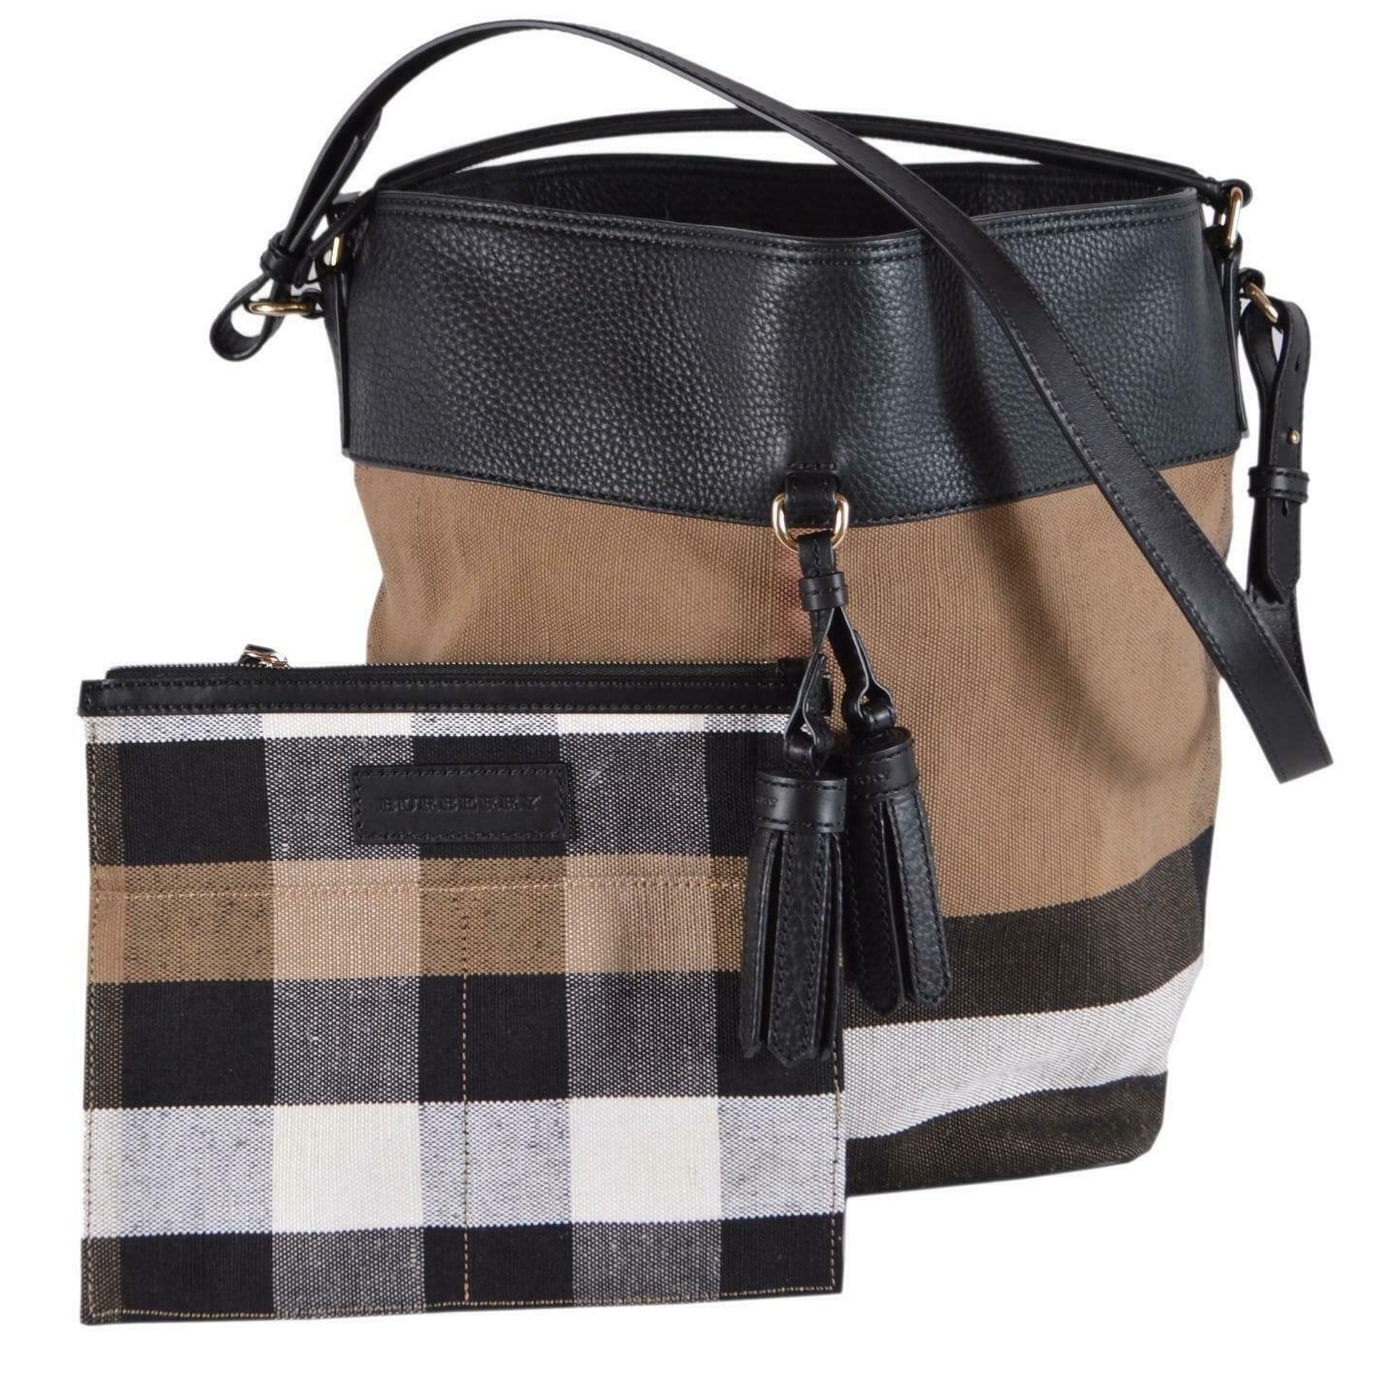 burberry pouch